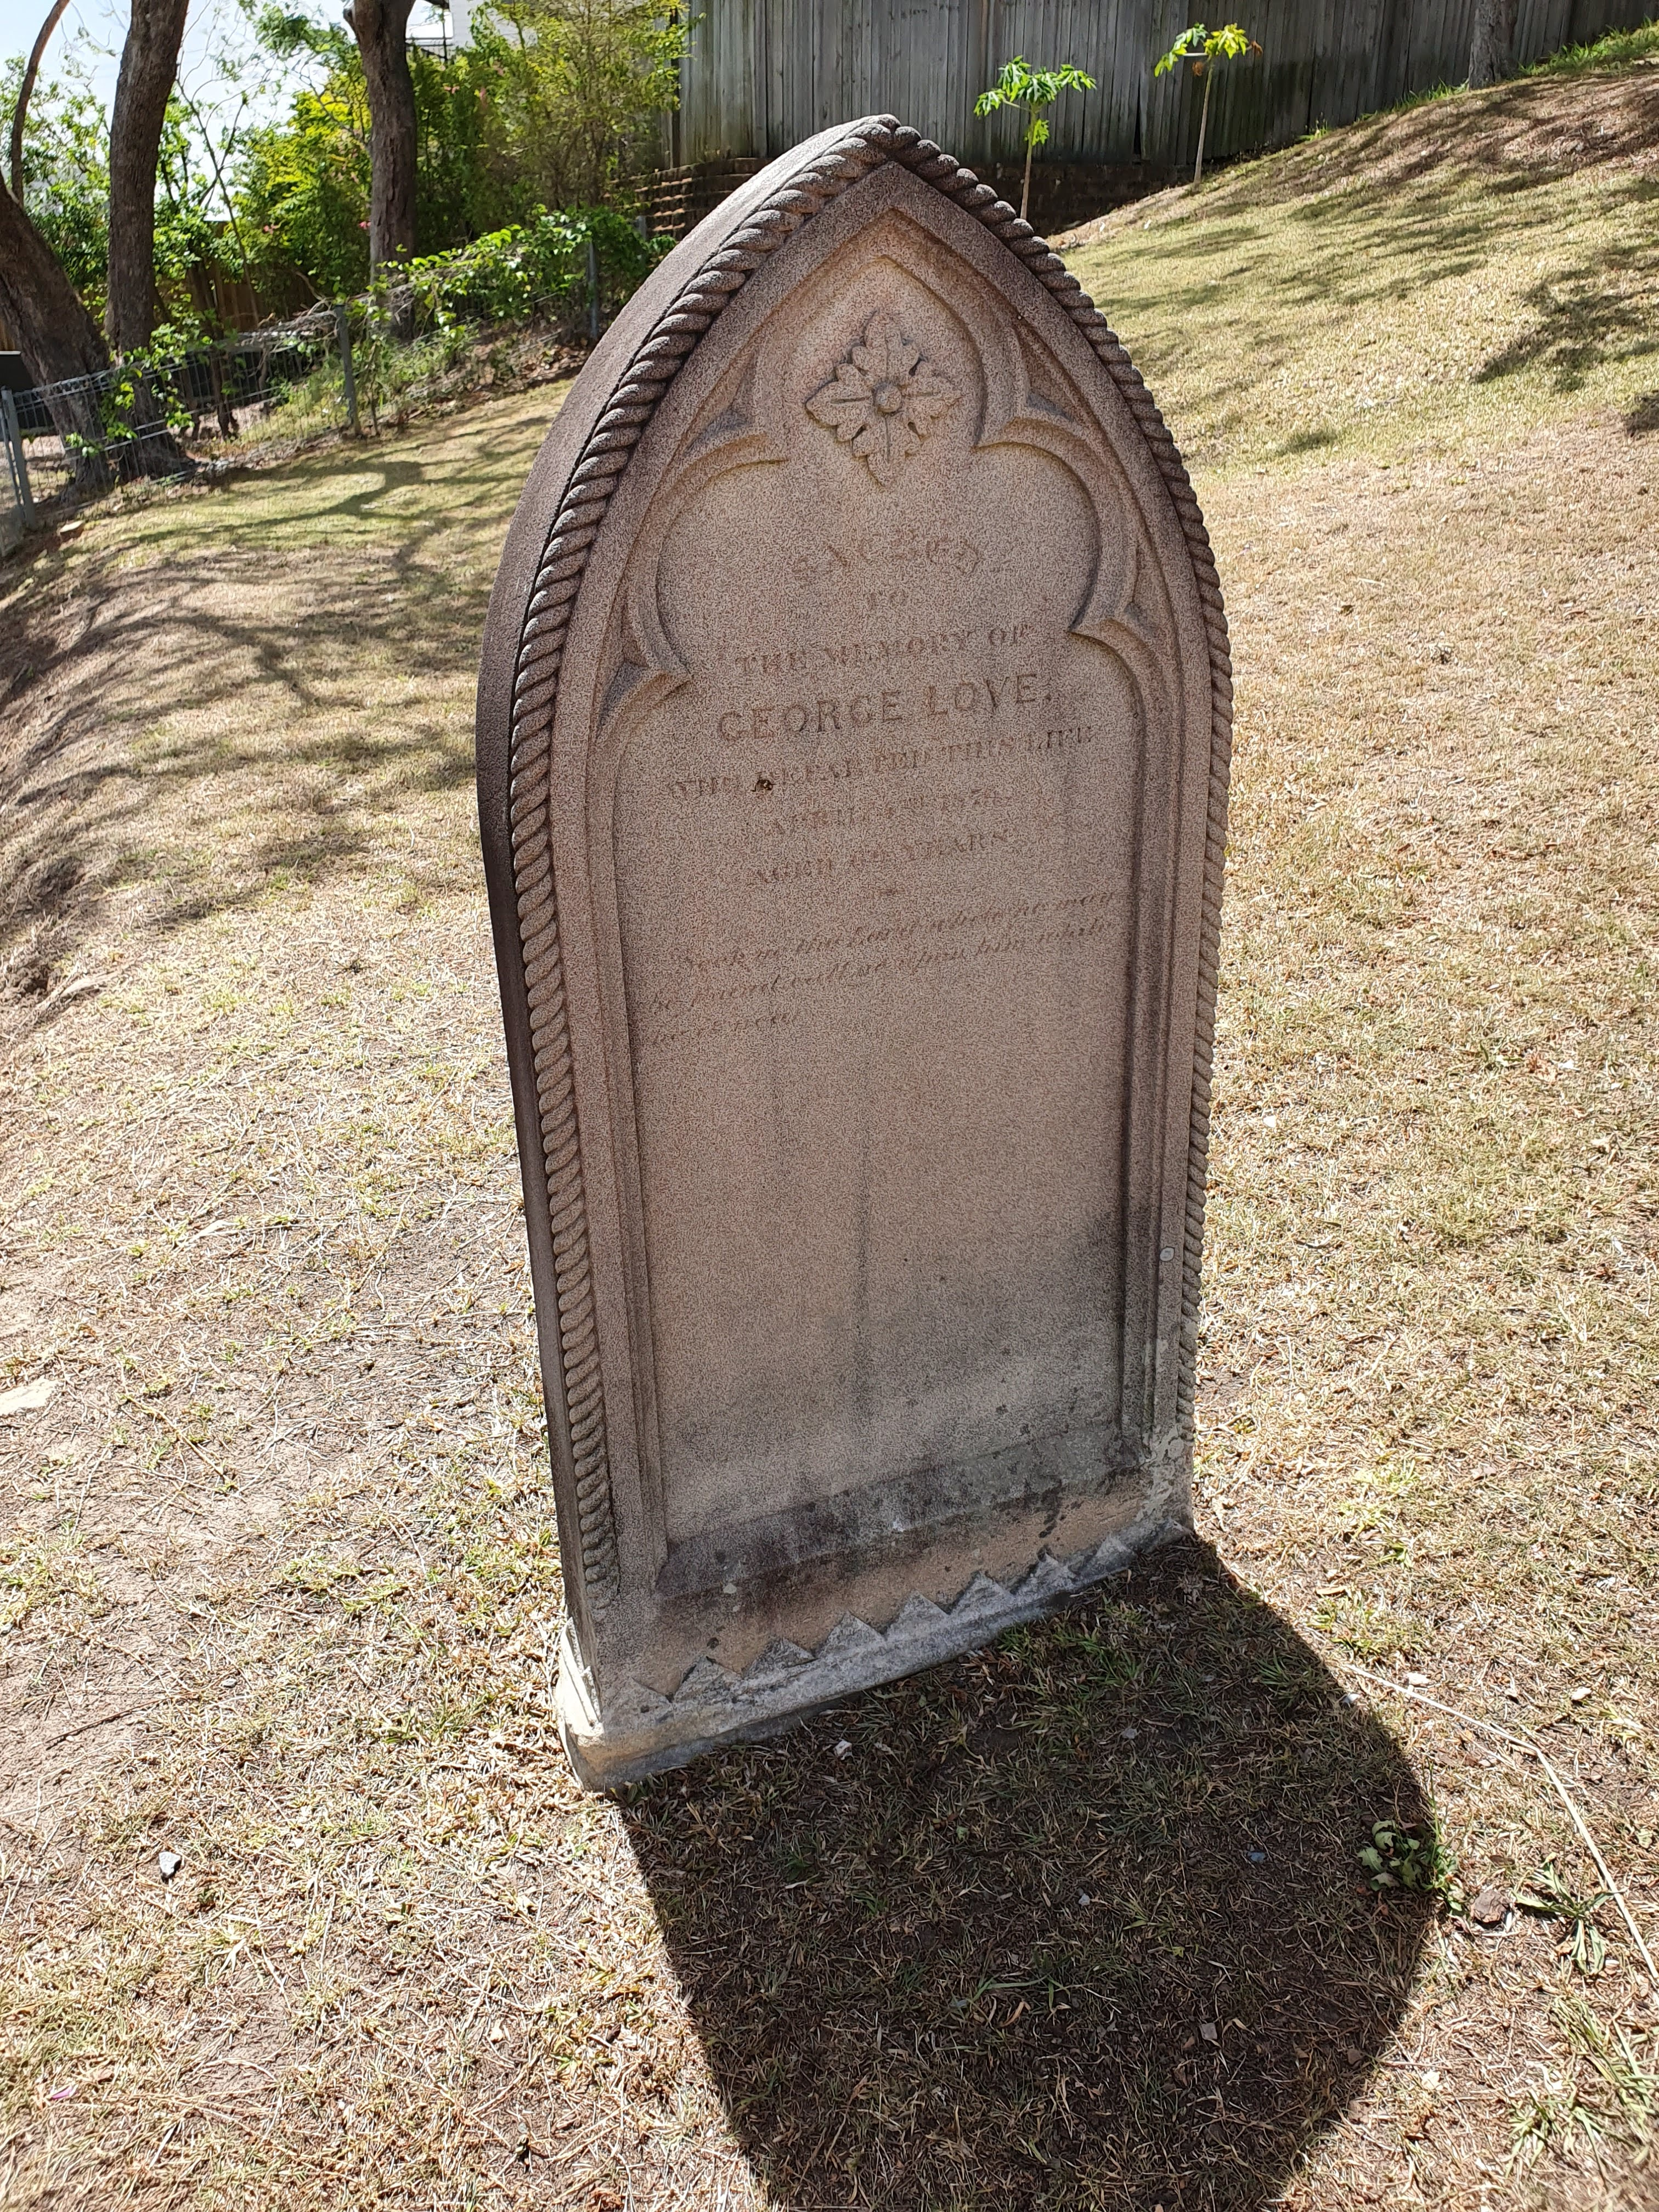 This is an image of a memorial to George Love located behind the Bulimba Uniting Church